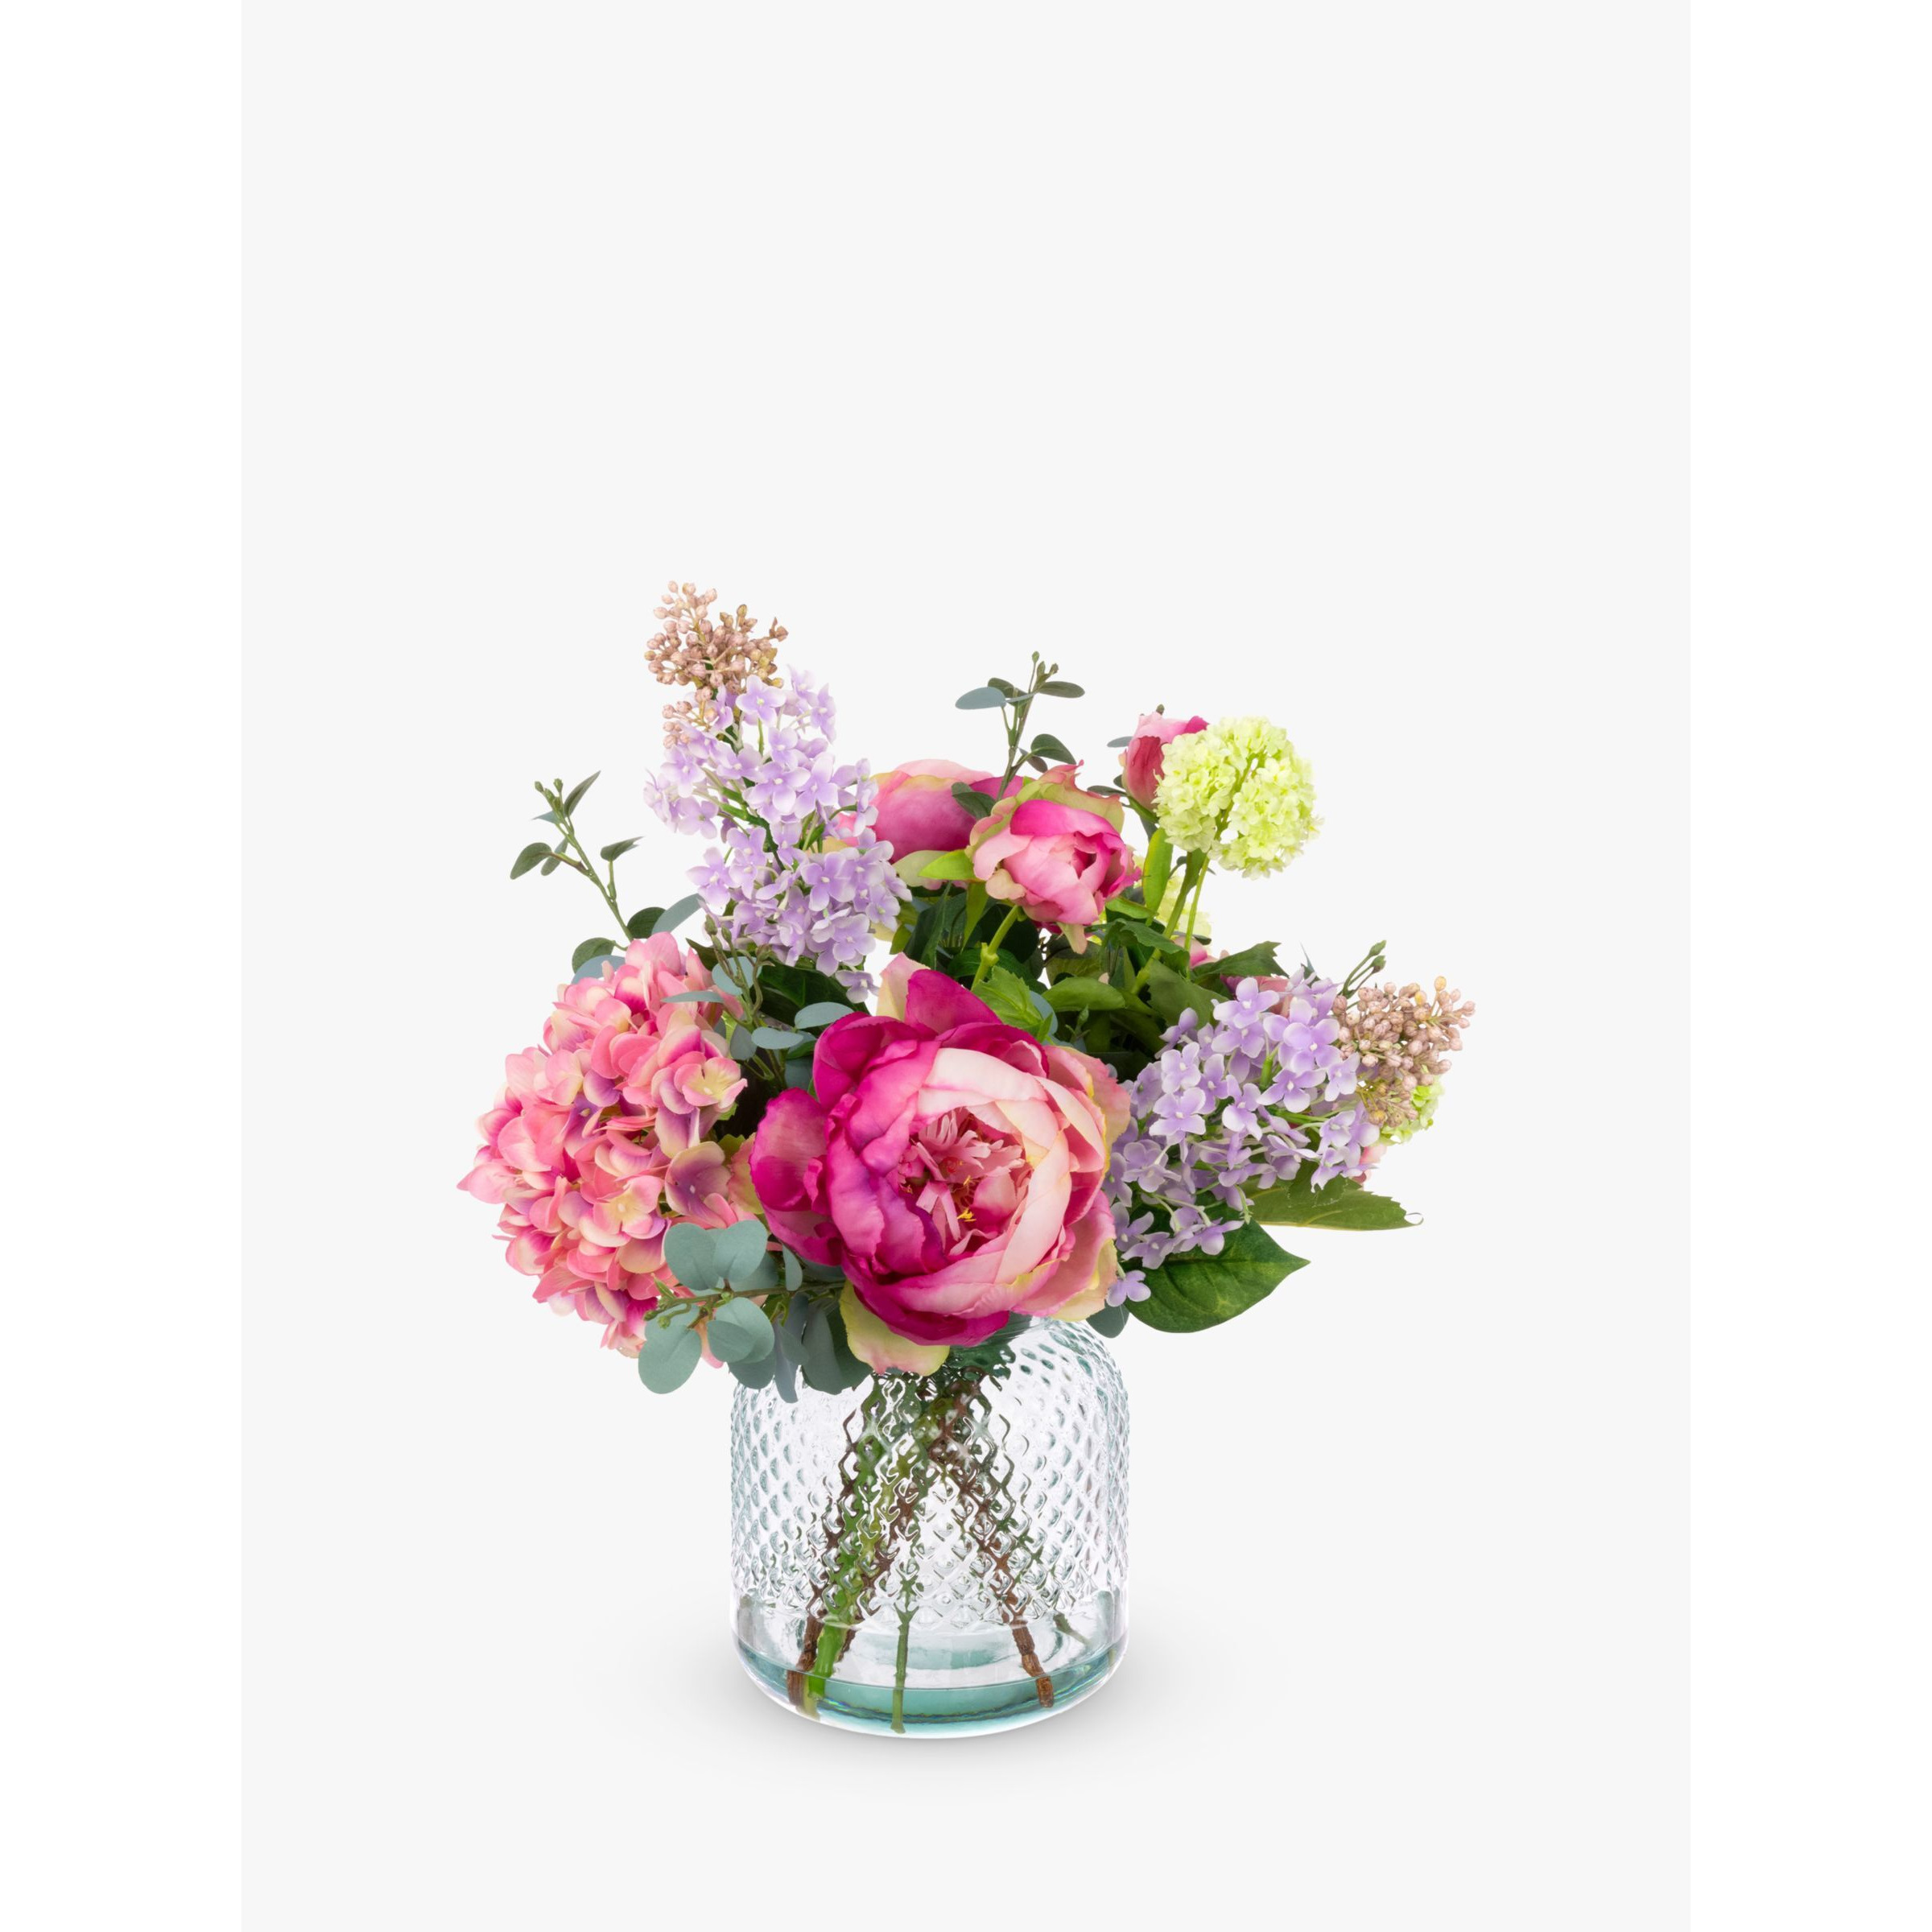 Floralsilk Artificial Hydrangea & Peony in a Textured Glass Vase, H47cm - image 1